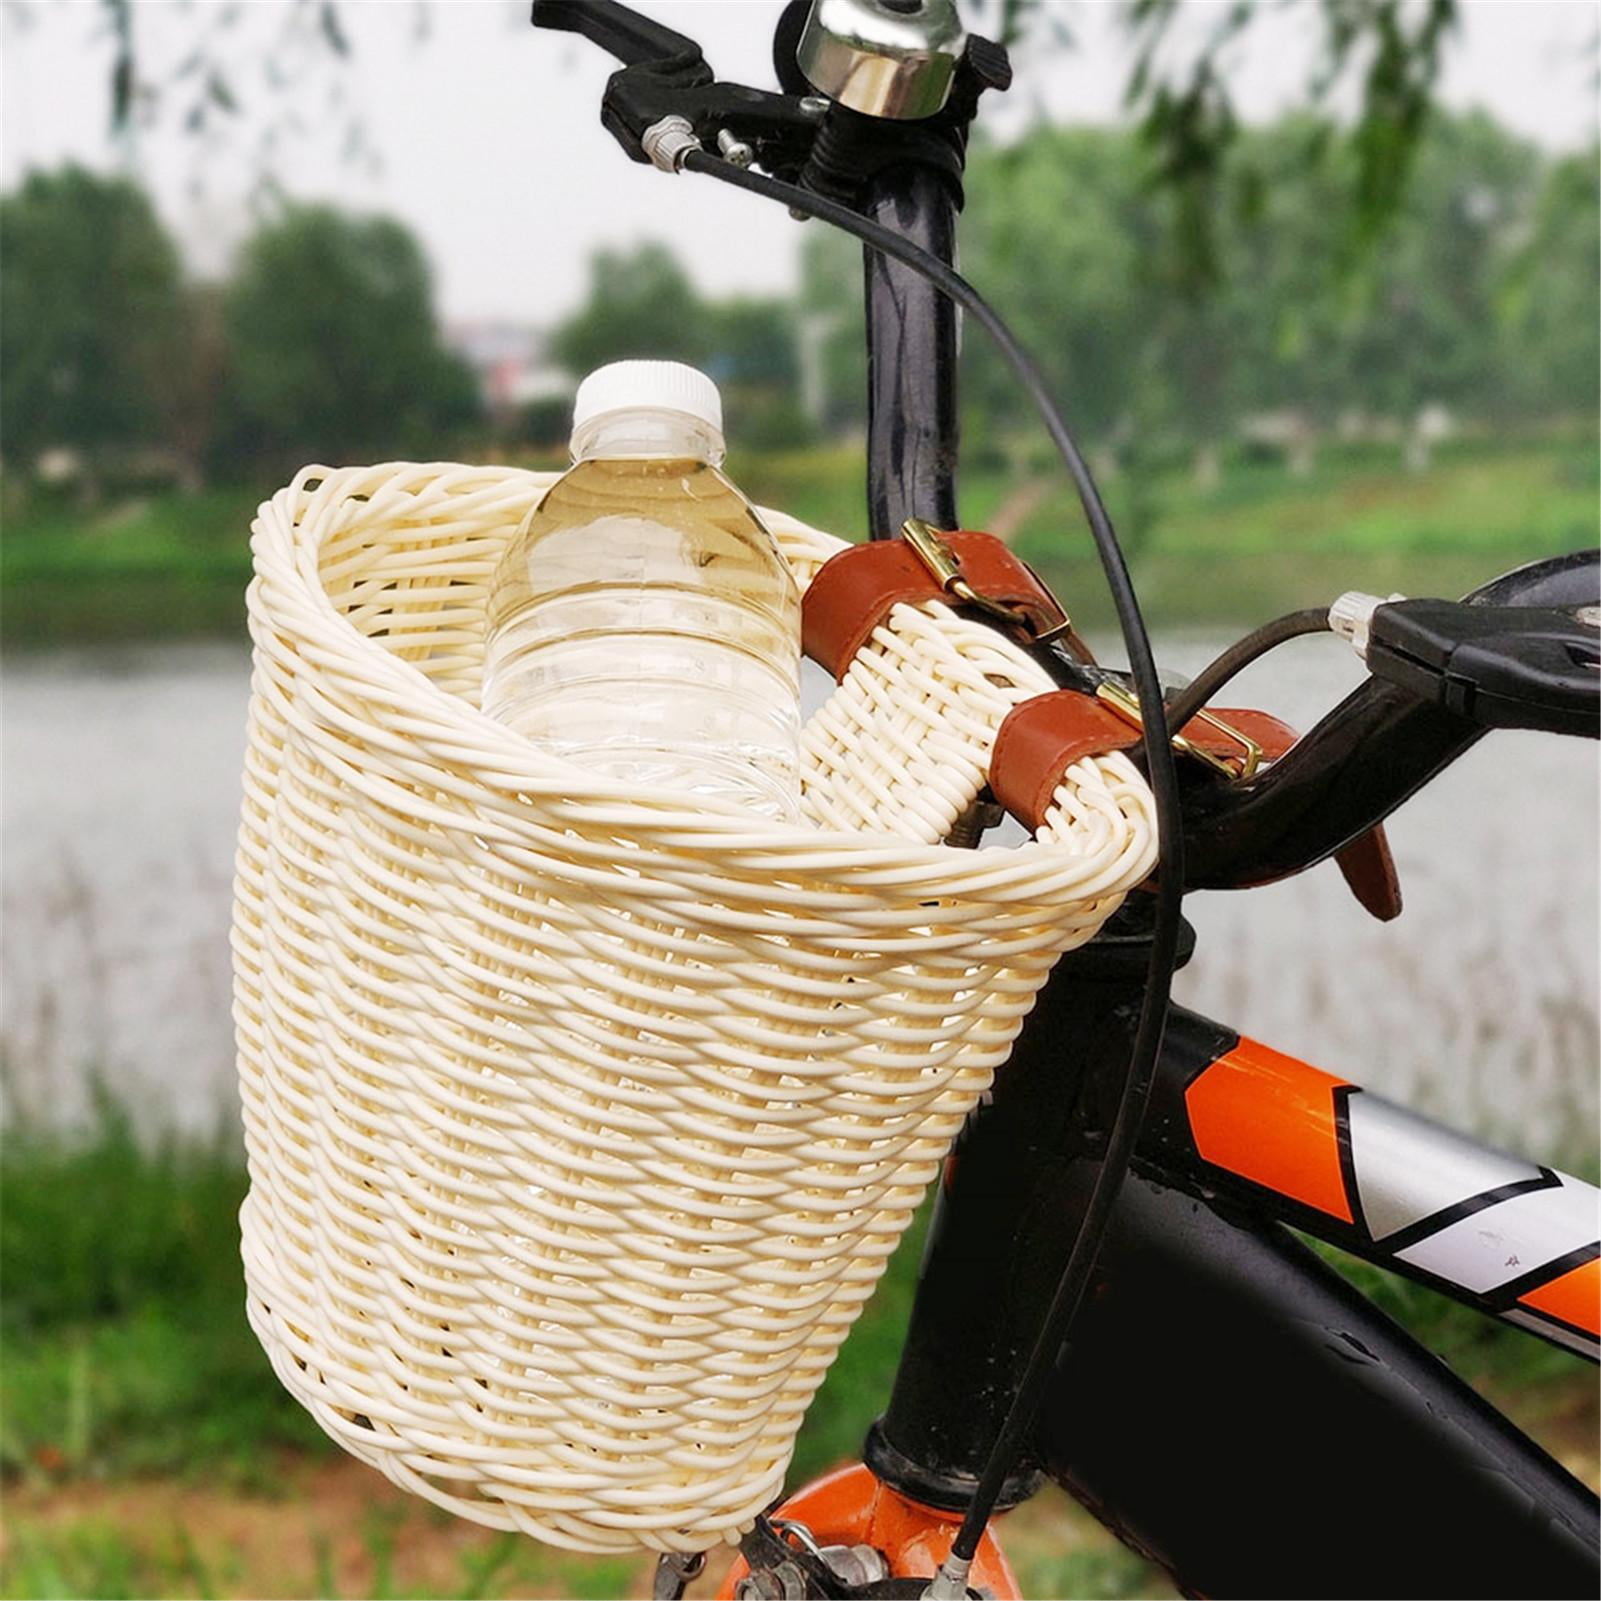 Details about    BIKE BASKET WICKER WHITE FRONT WITH HANDLE 